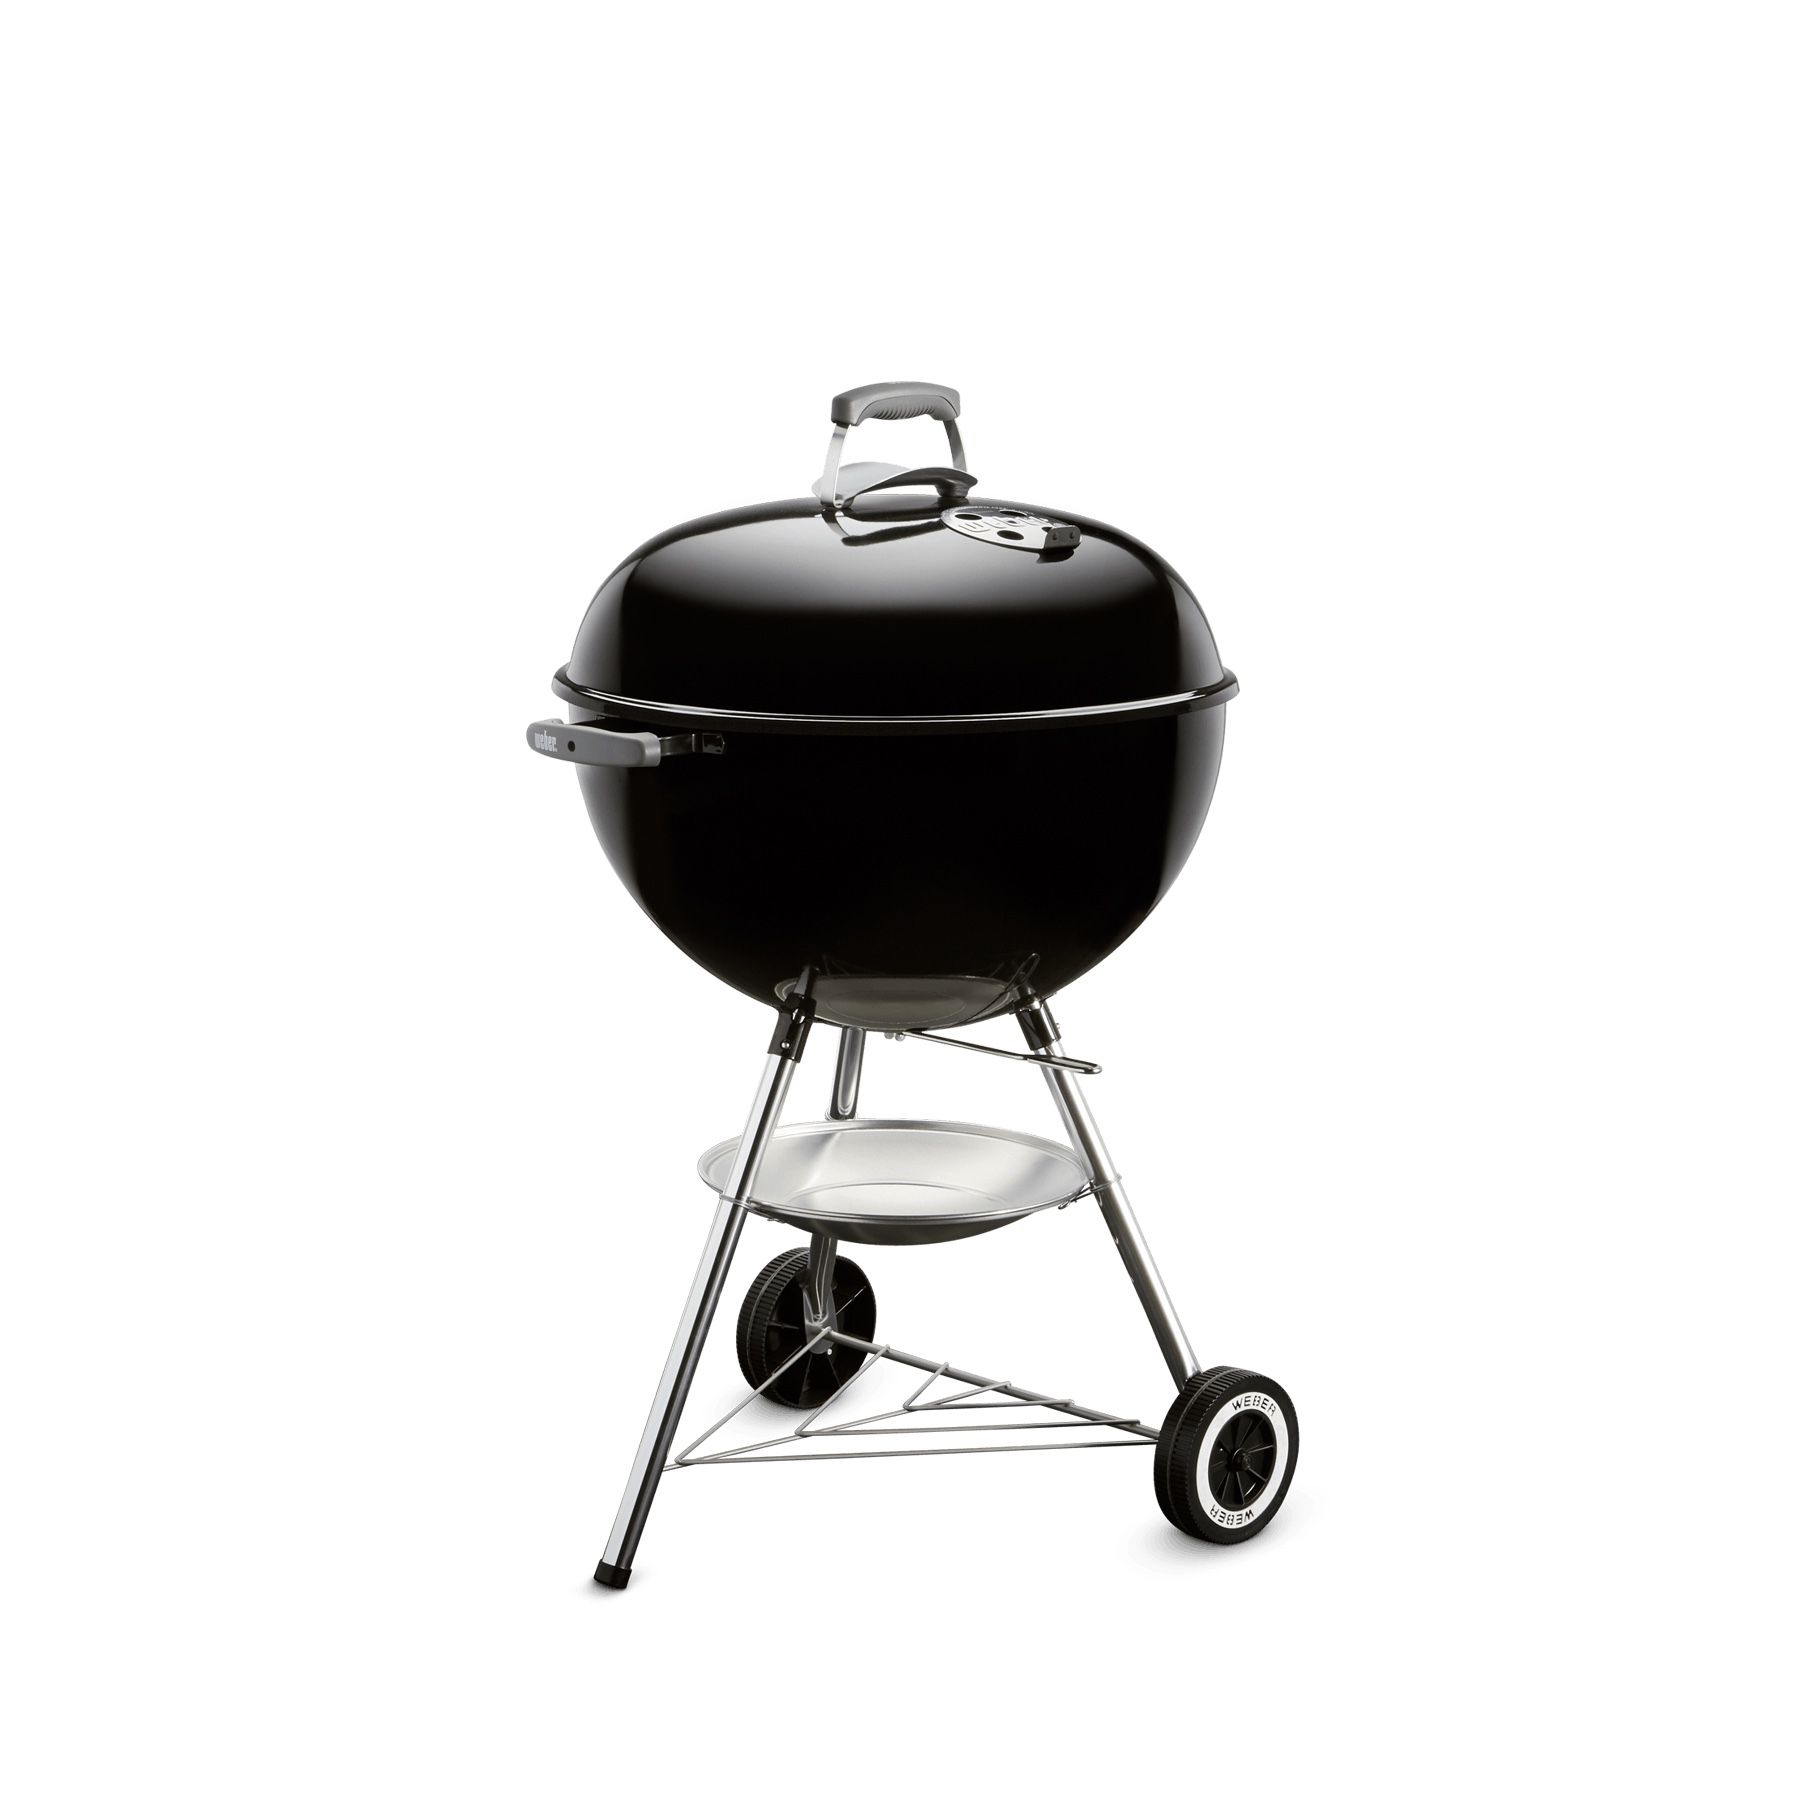 Weber Charcoal grill, plus everything you need to start grilling